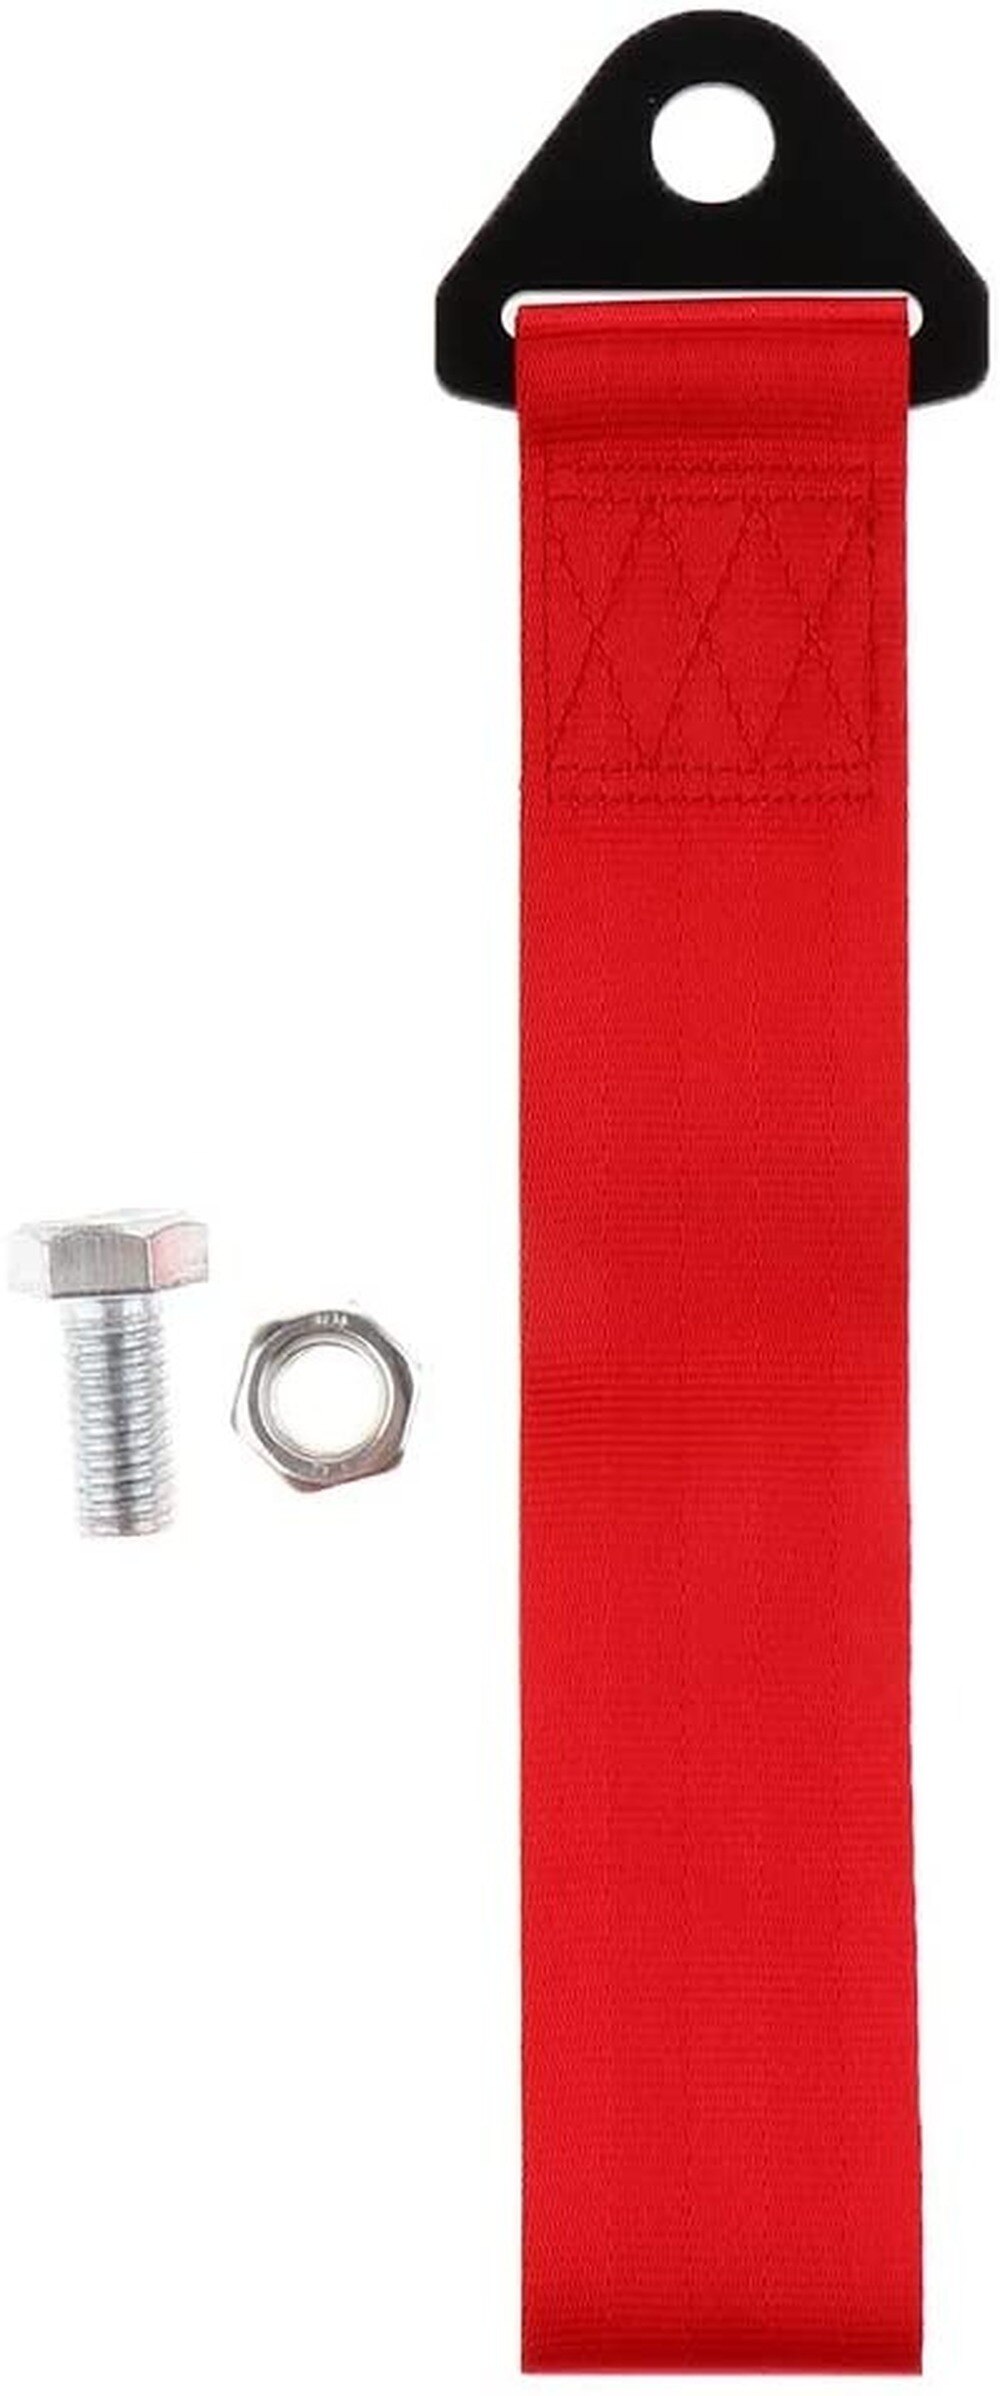 Great Performance Car Auto Tow Strap Set Front/Rear Bumper Hook - Red